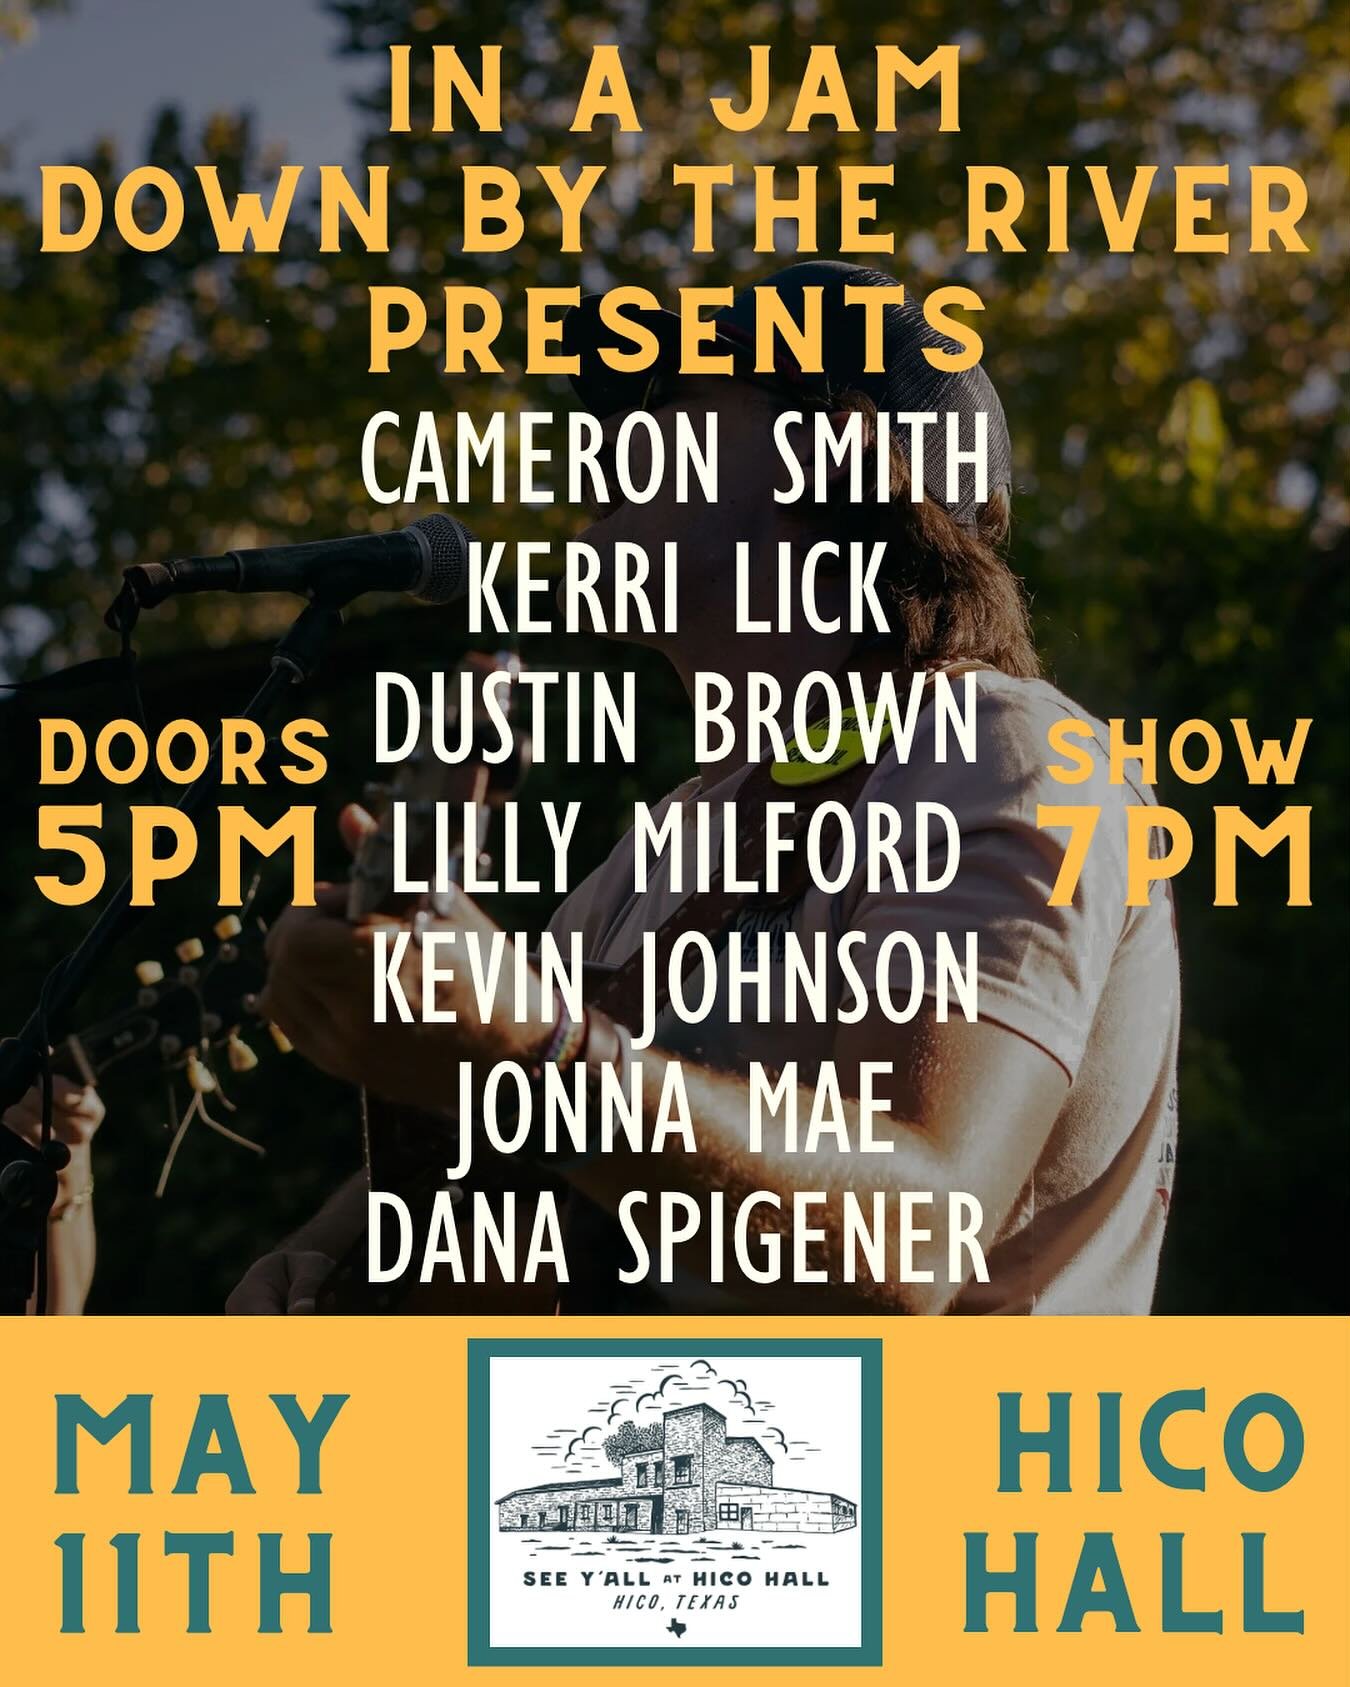 This Saturday folks! We&rsquo;ll see you at the beautiful @hicohall for the @inajamdownbytheriver mixer event!